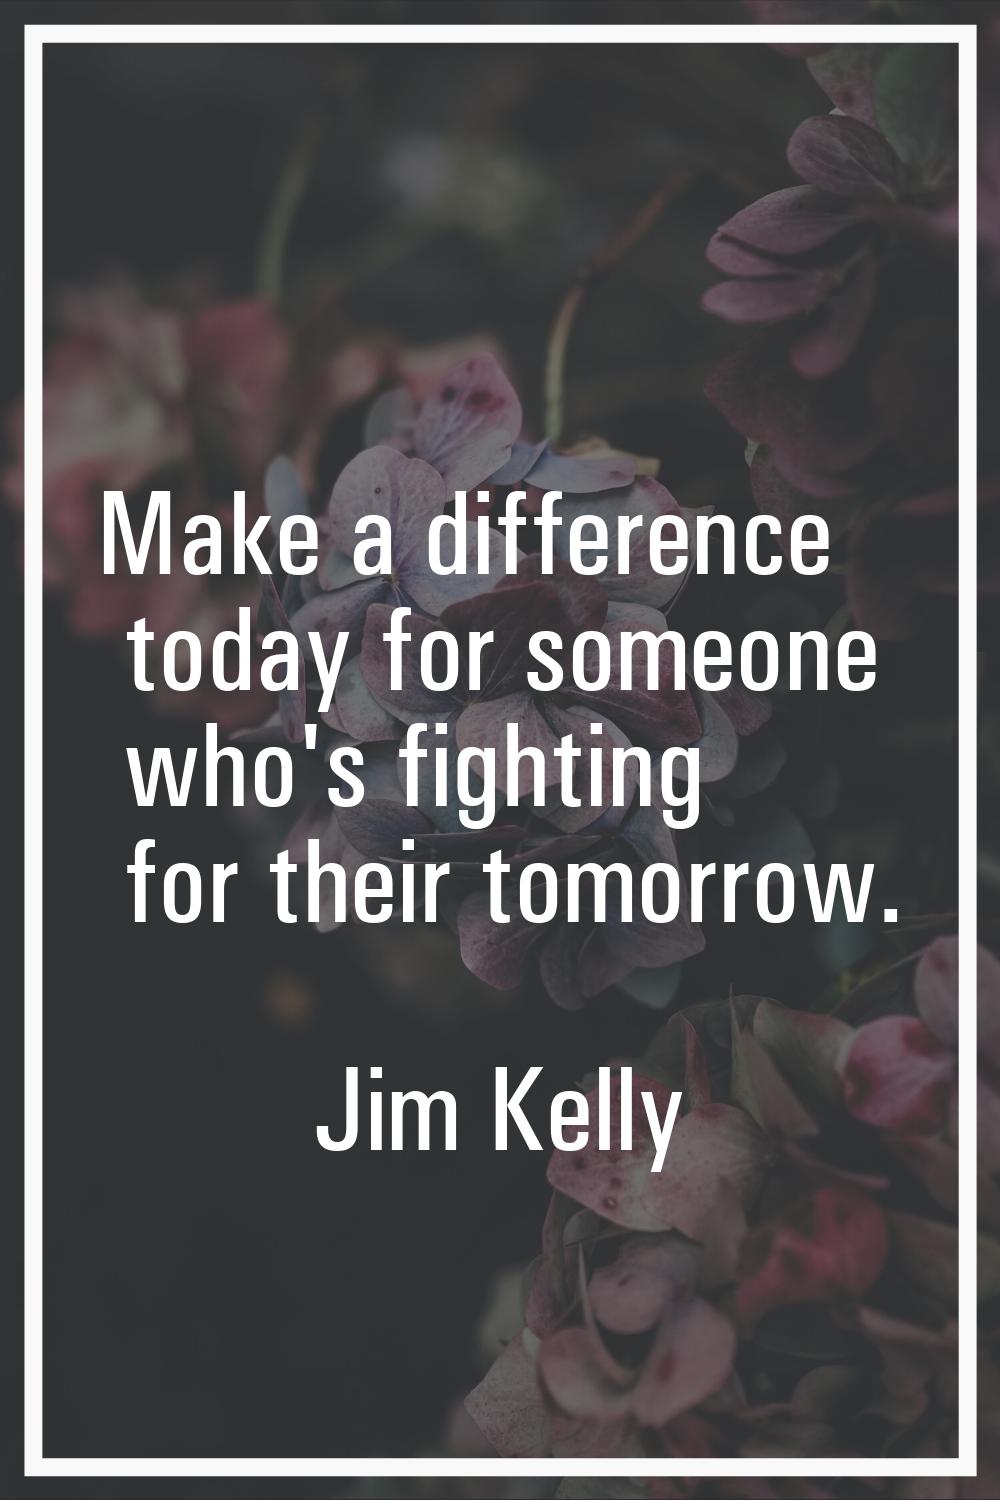 Make a difference today for someone who's fighting for their tomorrow.